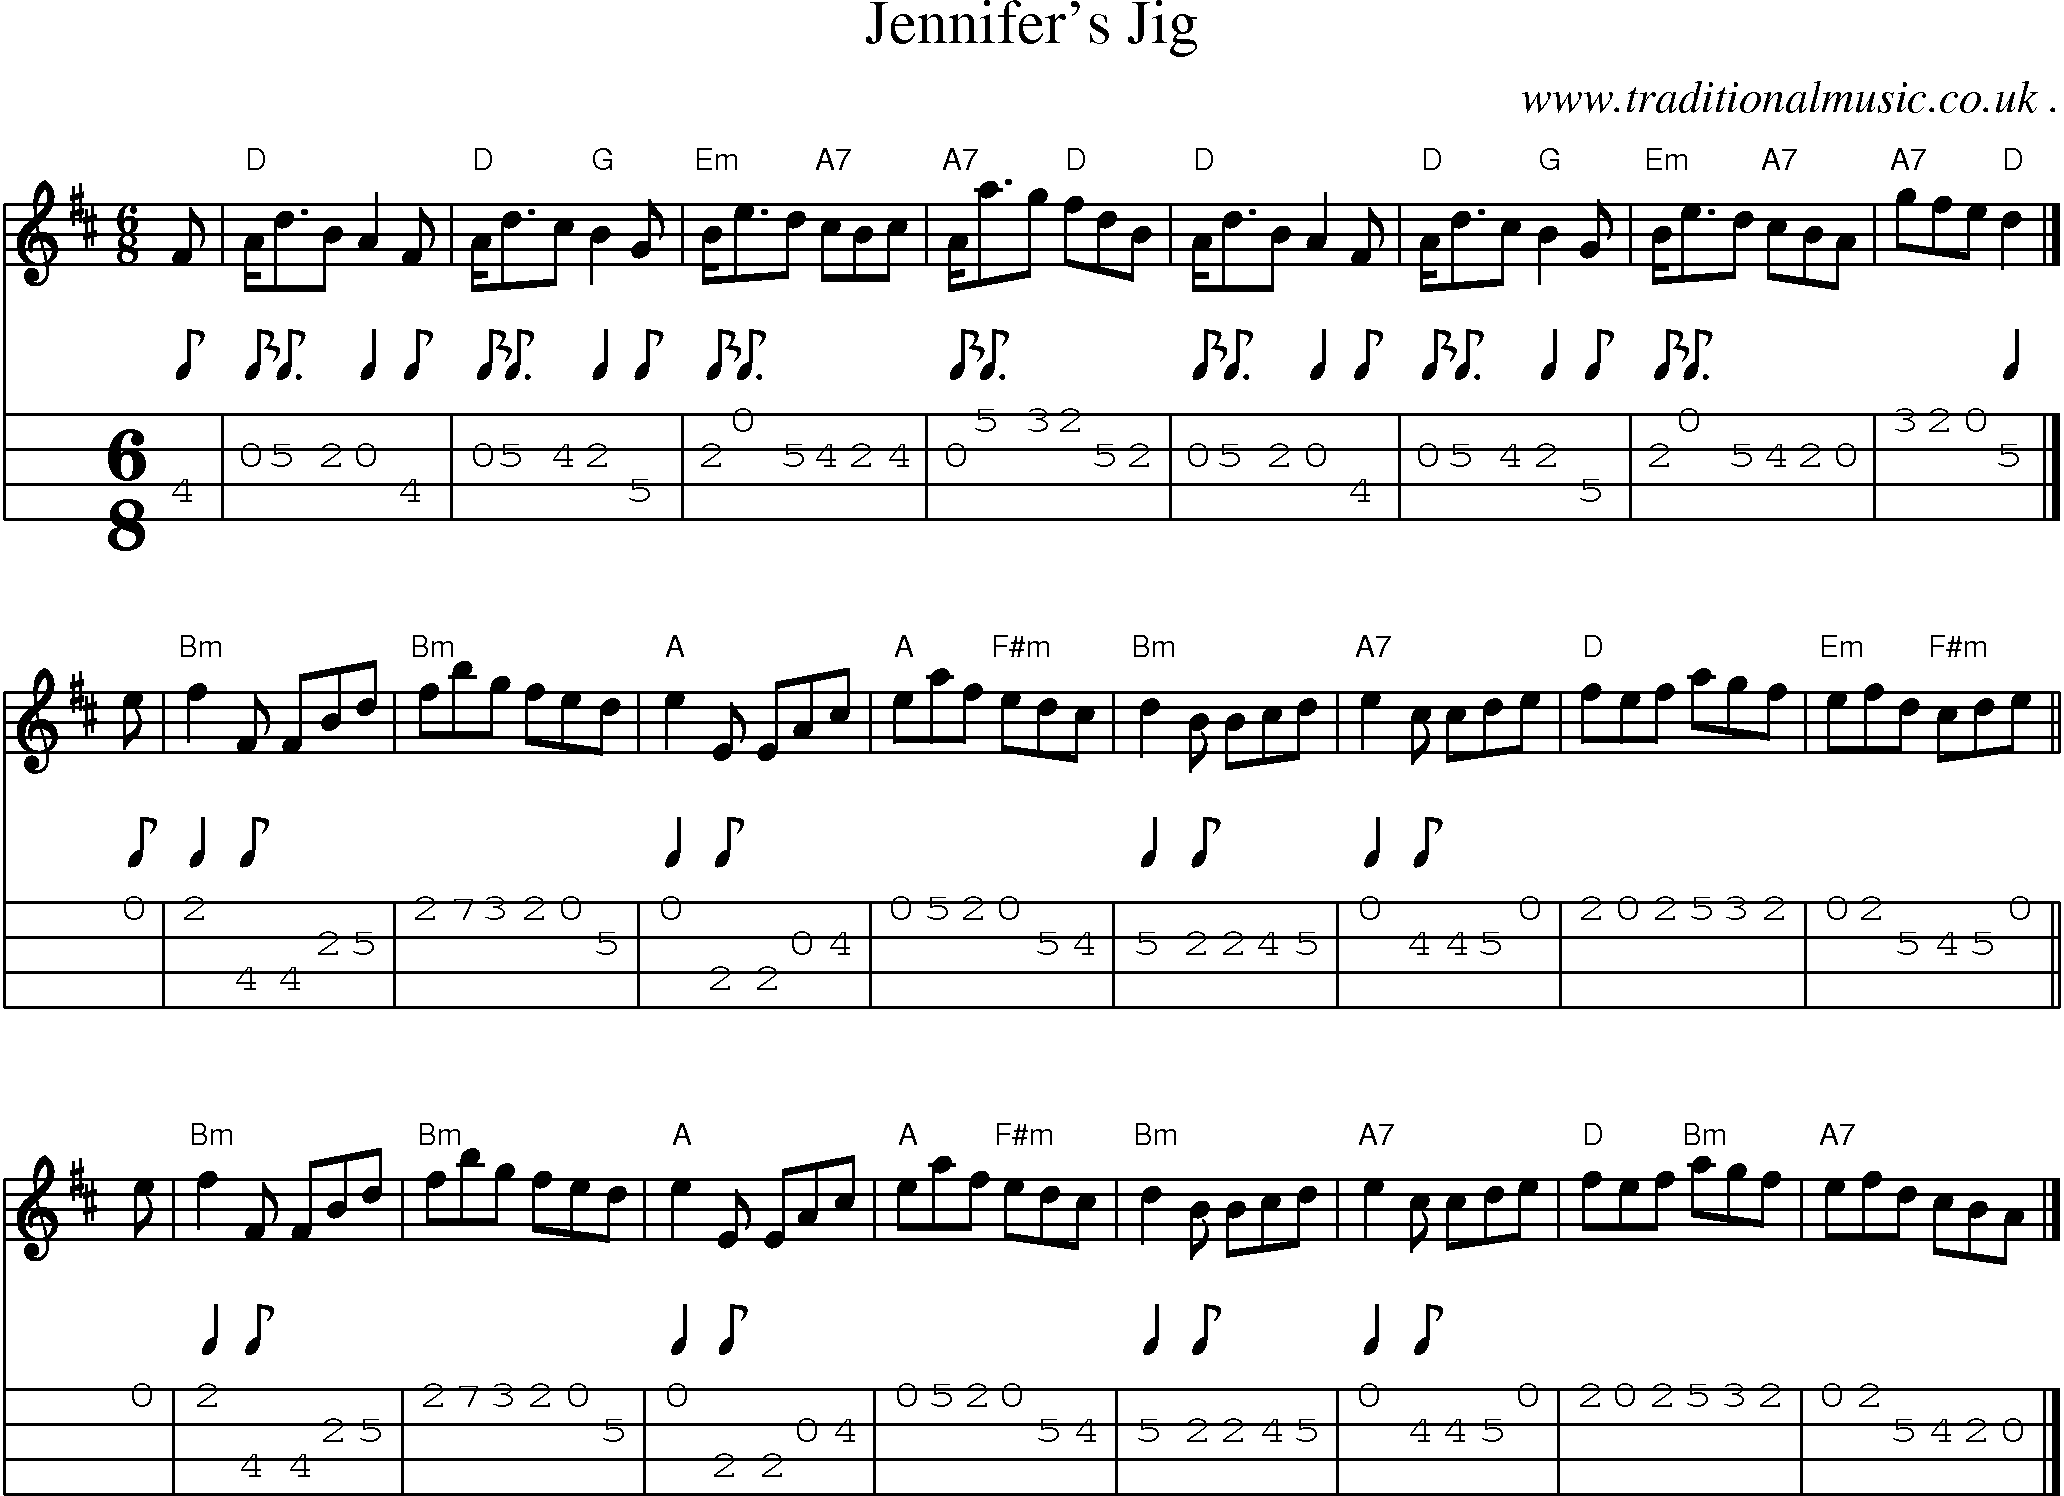 Sheet-music  score, Chords and Mandolin Tabs for Jennifers Jig